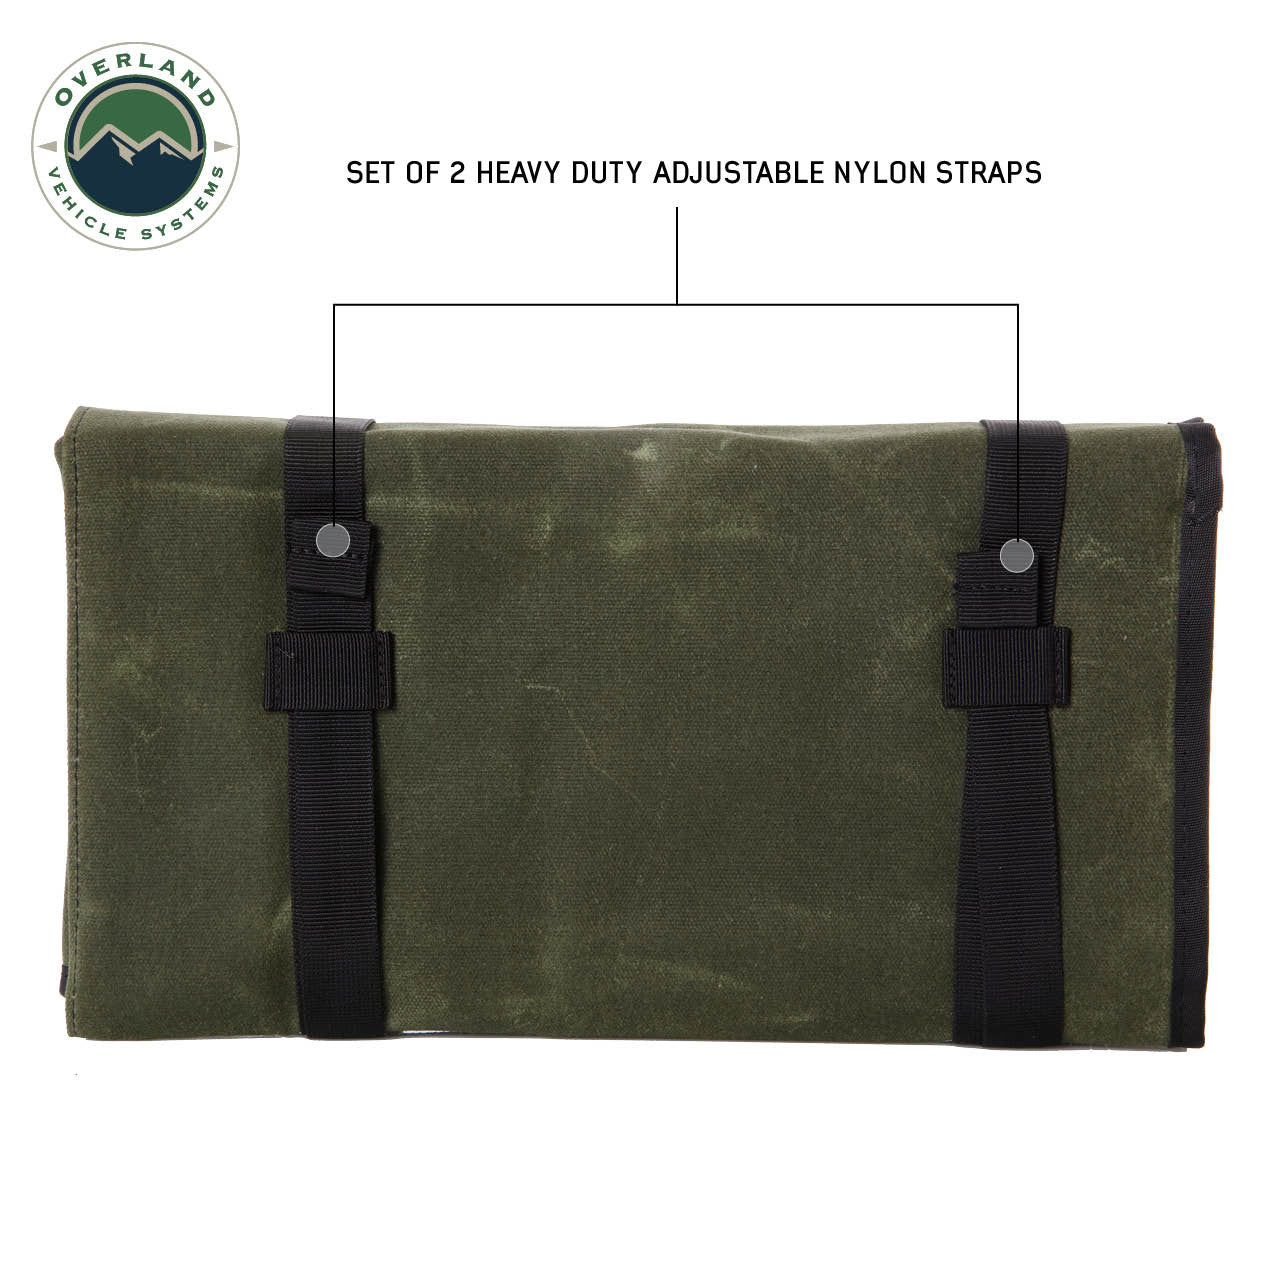 OVS Rolled General Tool Storage Bag - #16 Waxed Canvas